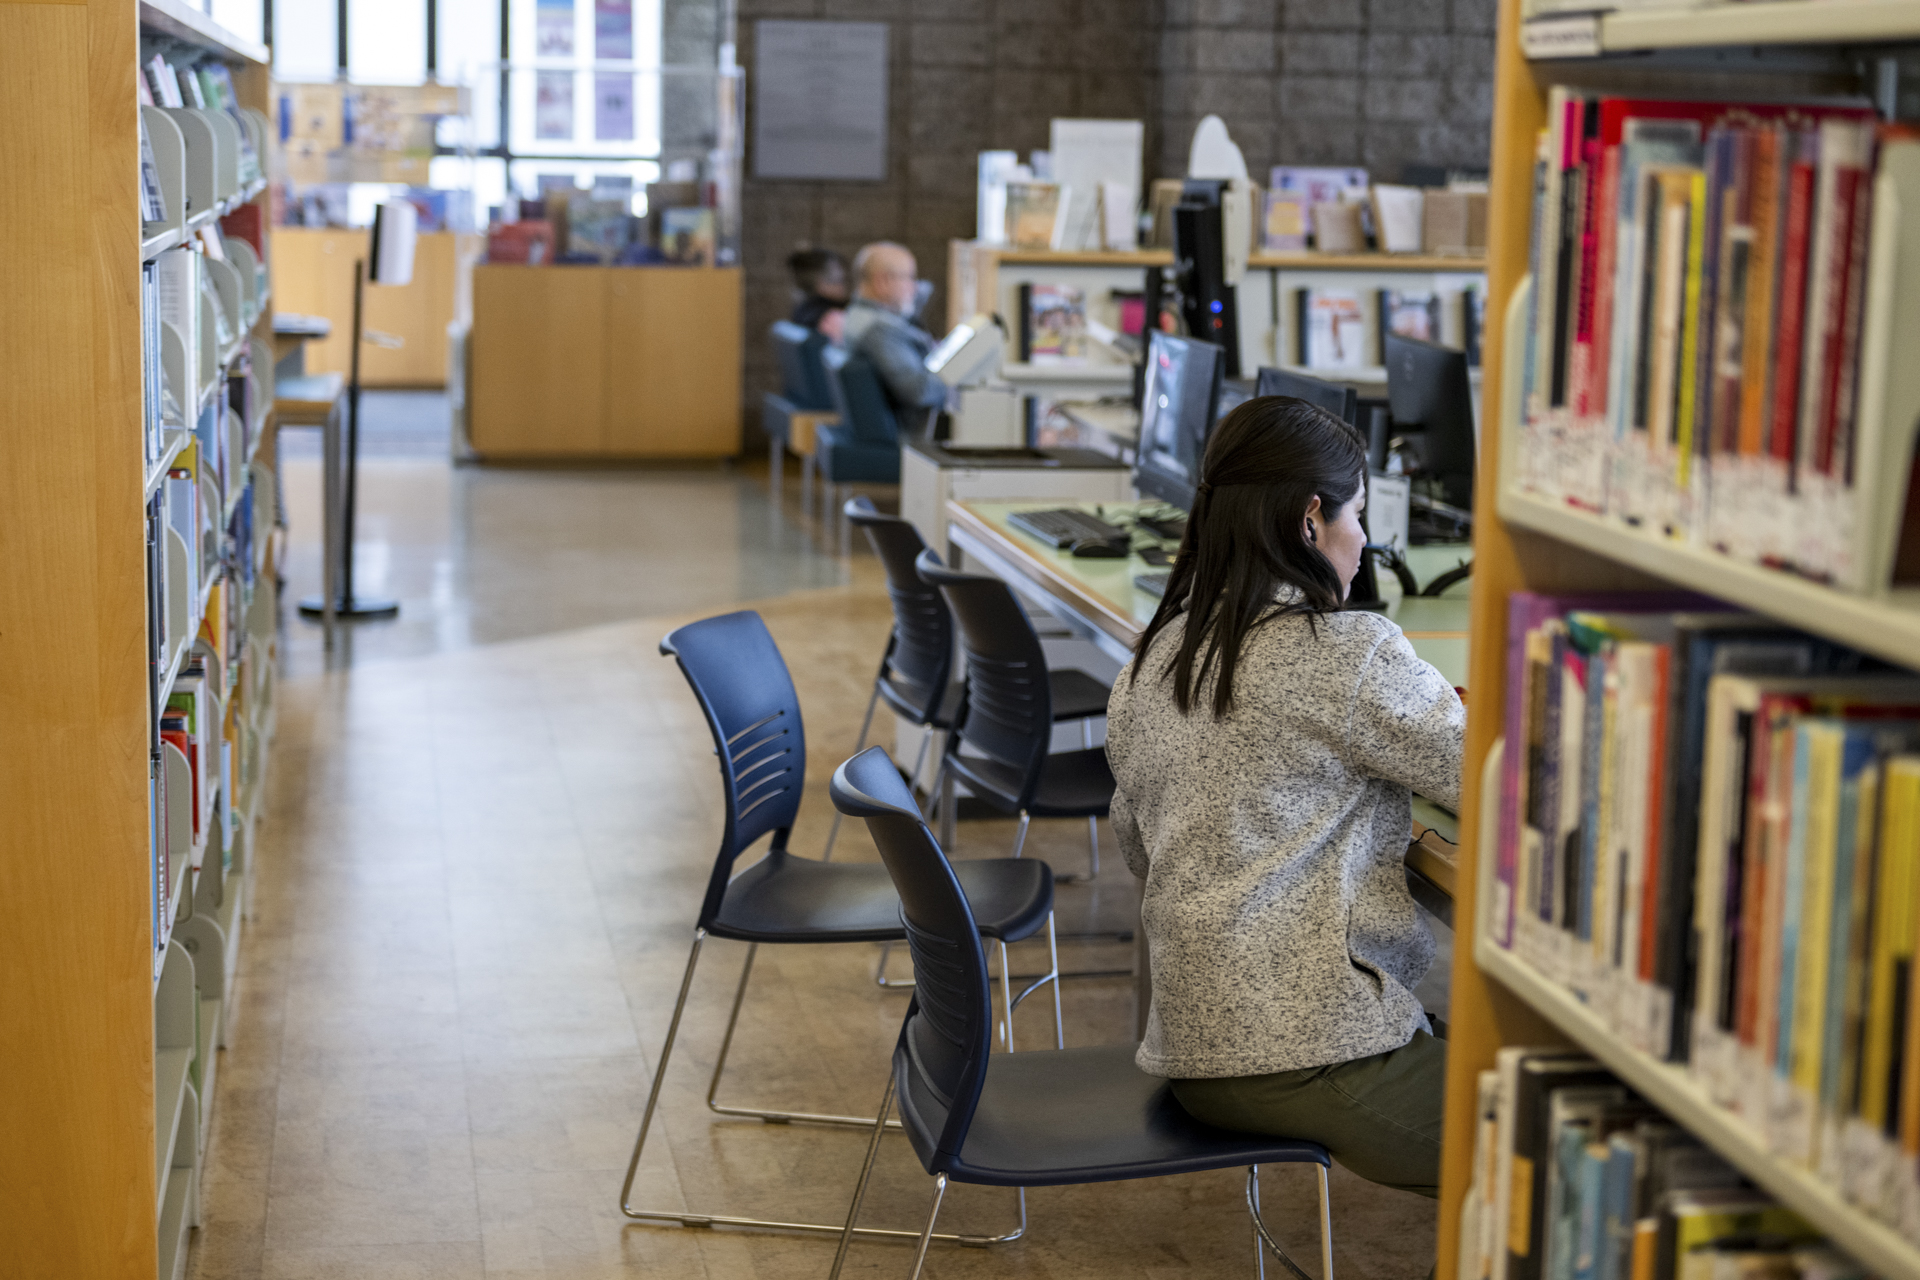 A person in a library with chairs, desks, and bookshelves in the background.